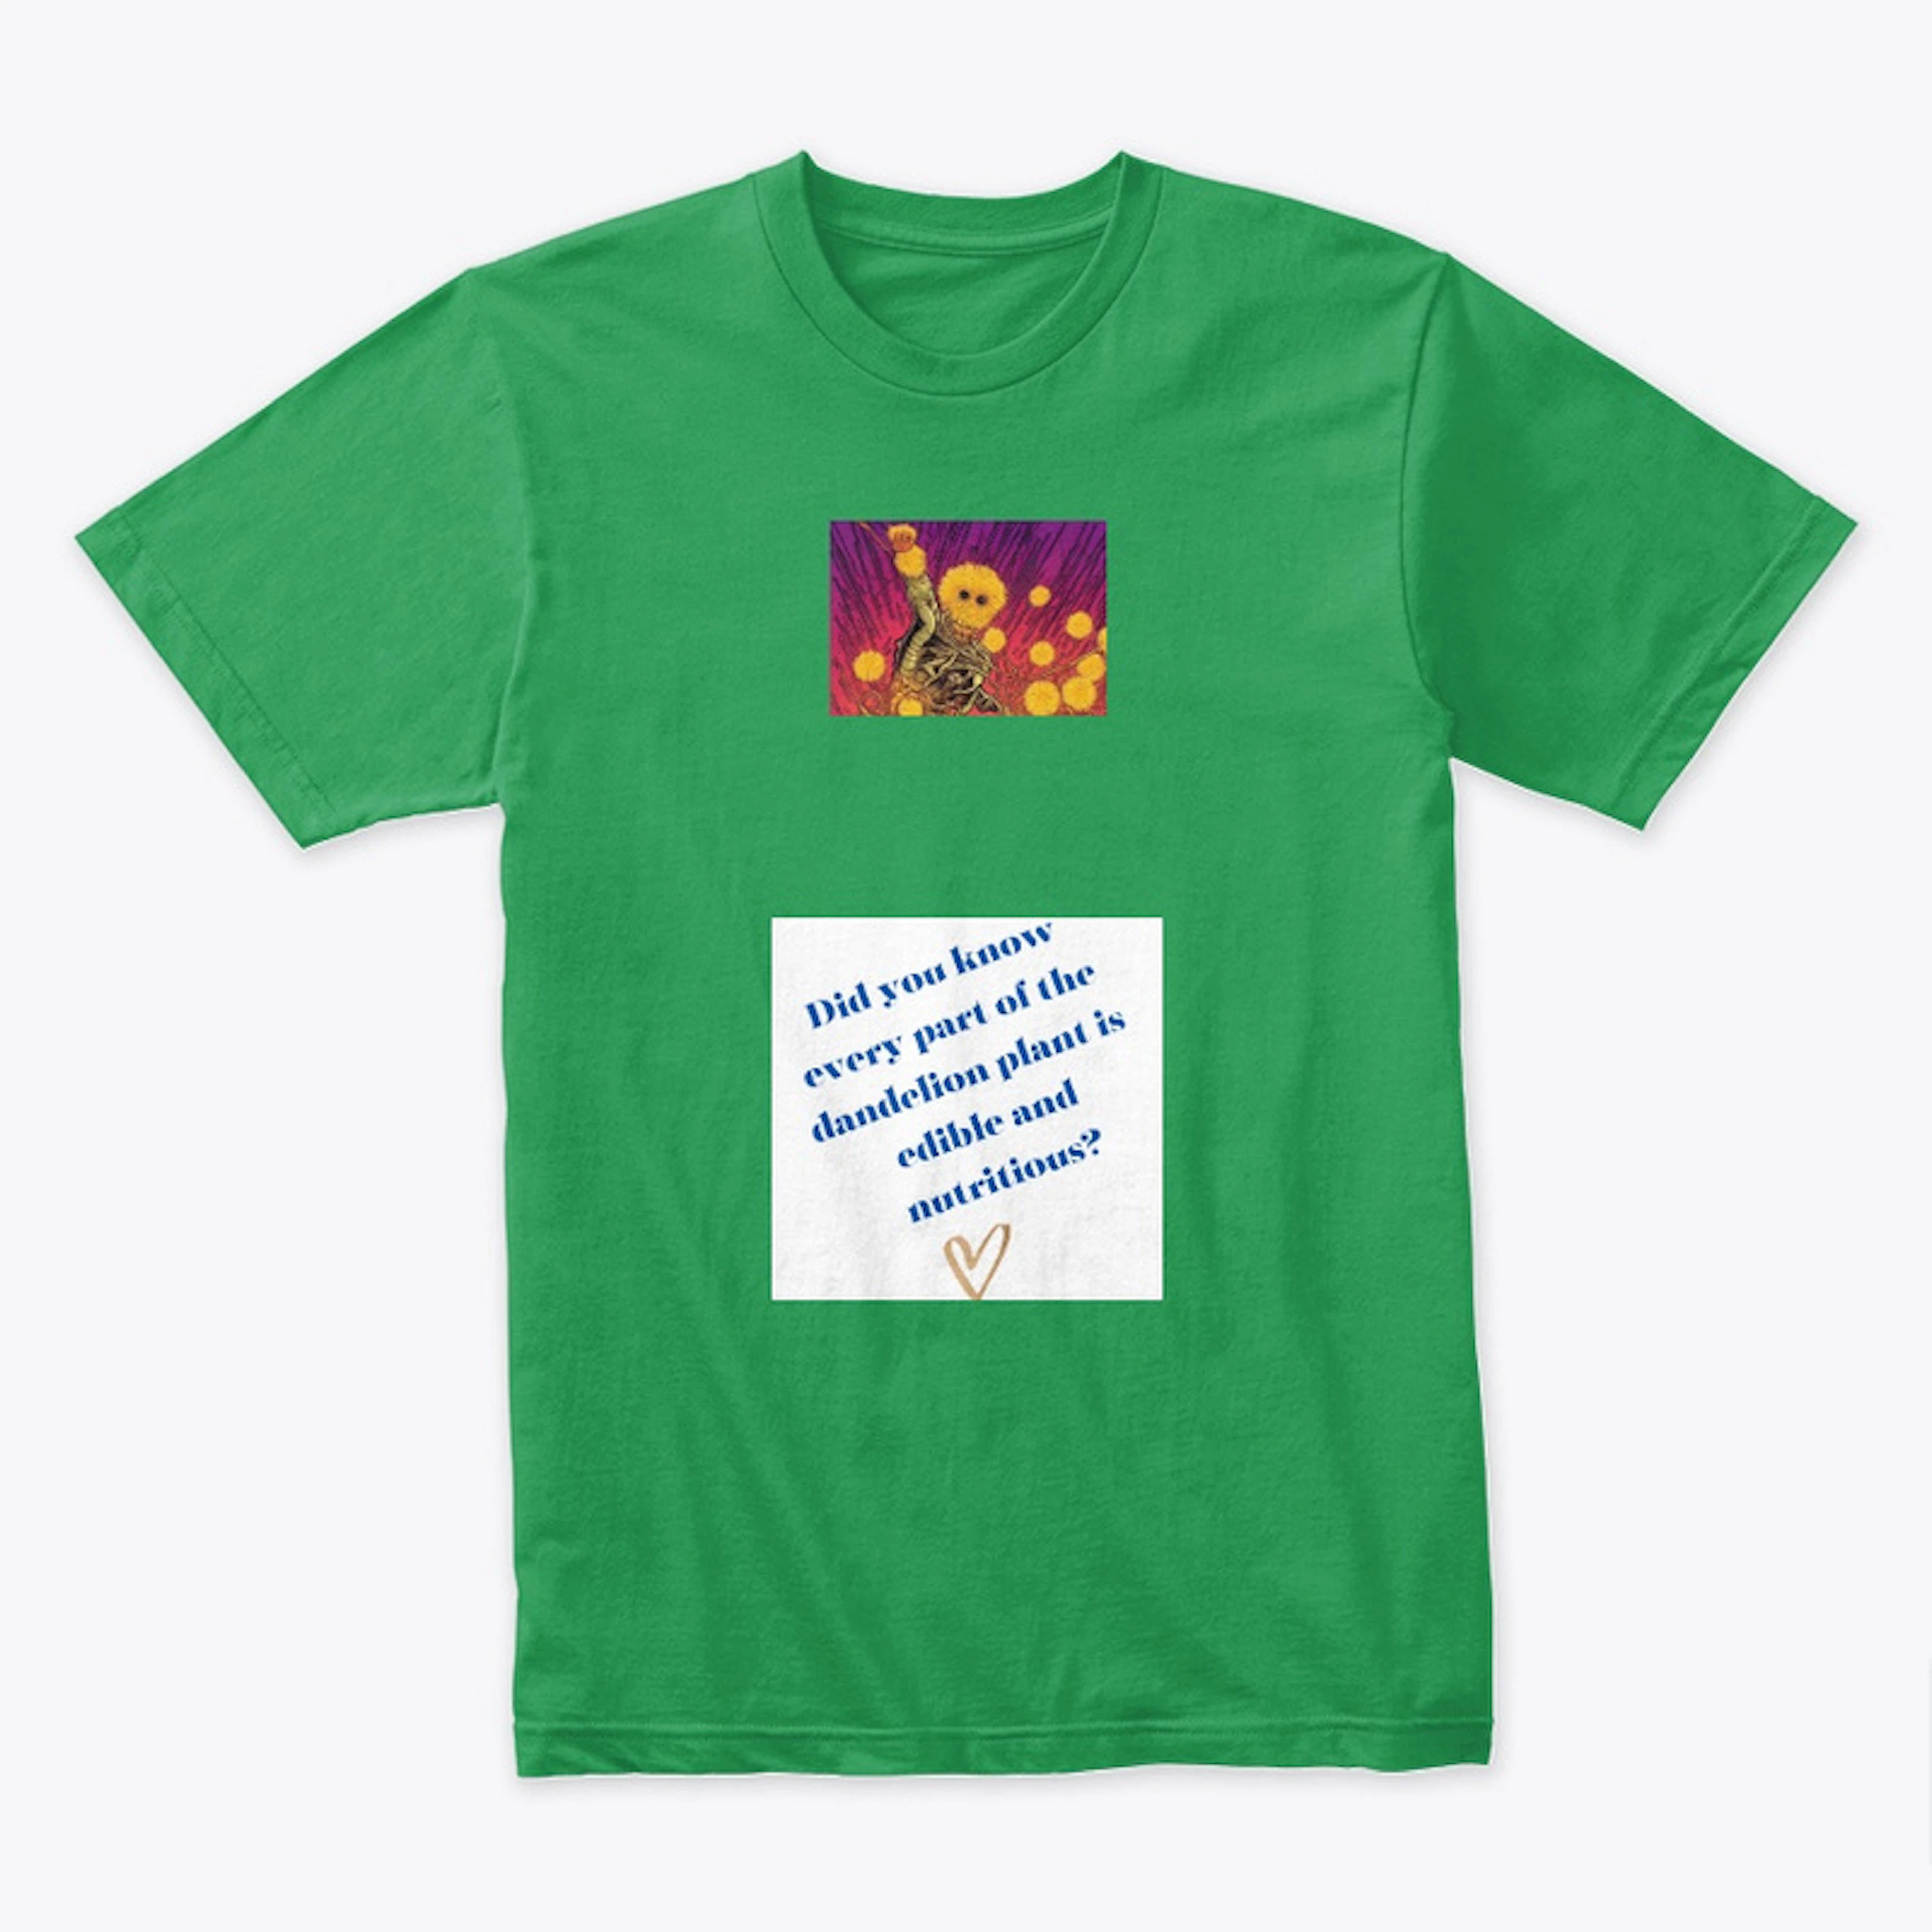 Dandelion Brand Products - Shirts & More